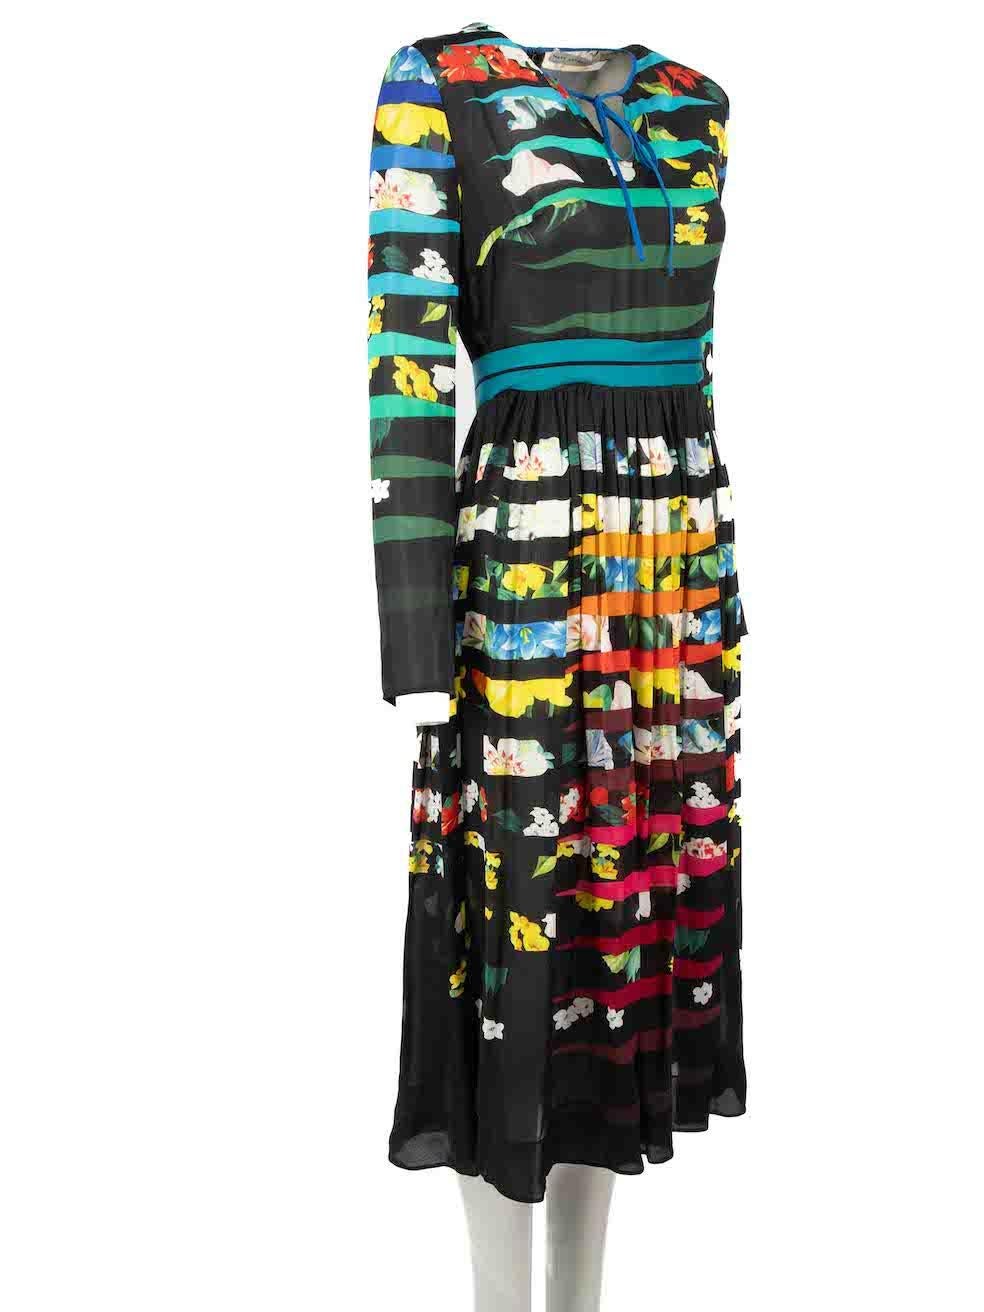 CONDITION is Good. General wear to dress is evident. Moderate signs of wear to the weave of the silk with pulls all over on this used Mary Katrantzou designer resale item. 
 
Details
Multicolour
Silk
Maxi dress
Sheer
Rainbow striped floral pattern
V